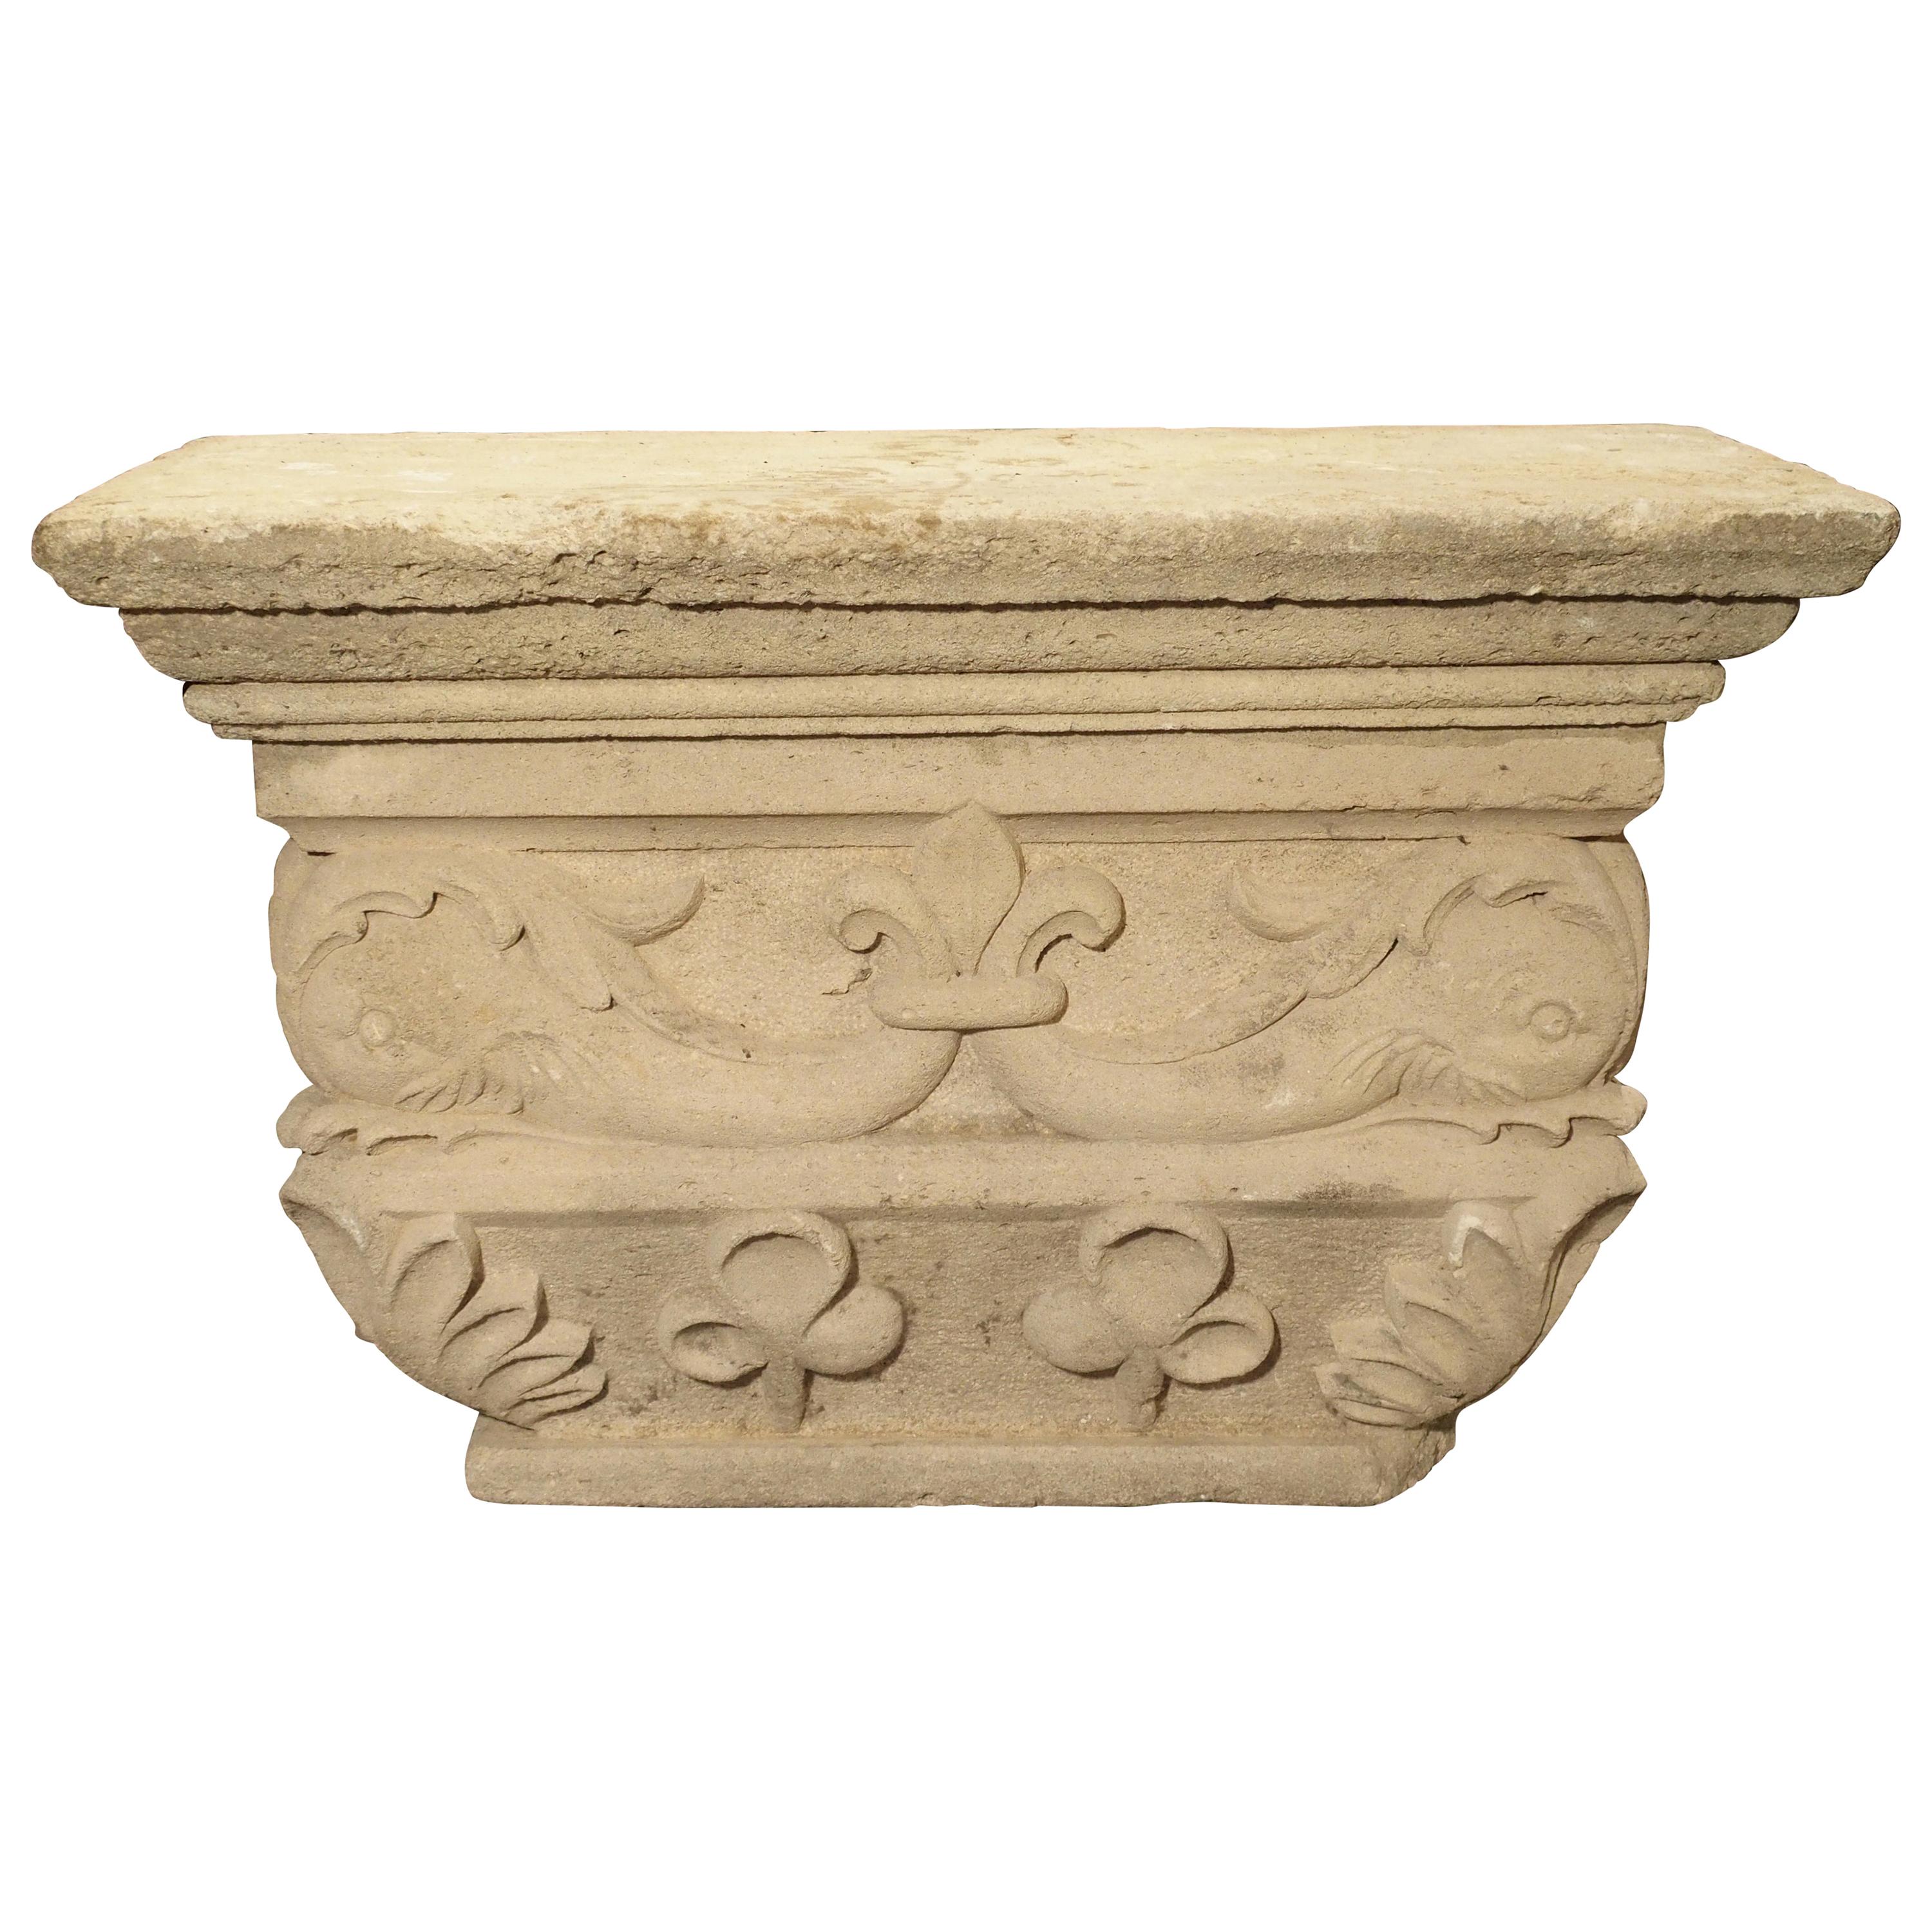 This fabulous antique French statuary pedestal has been made from a limestone quarried around Savonnières-en-Perthois sometime in the 19th century. The top has three stepped in moldings. The middle level’s ornamentation depicts beautifully carved,